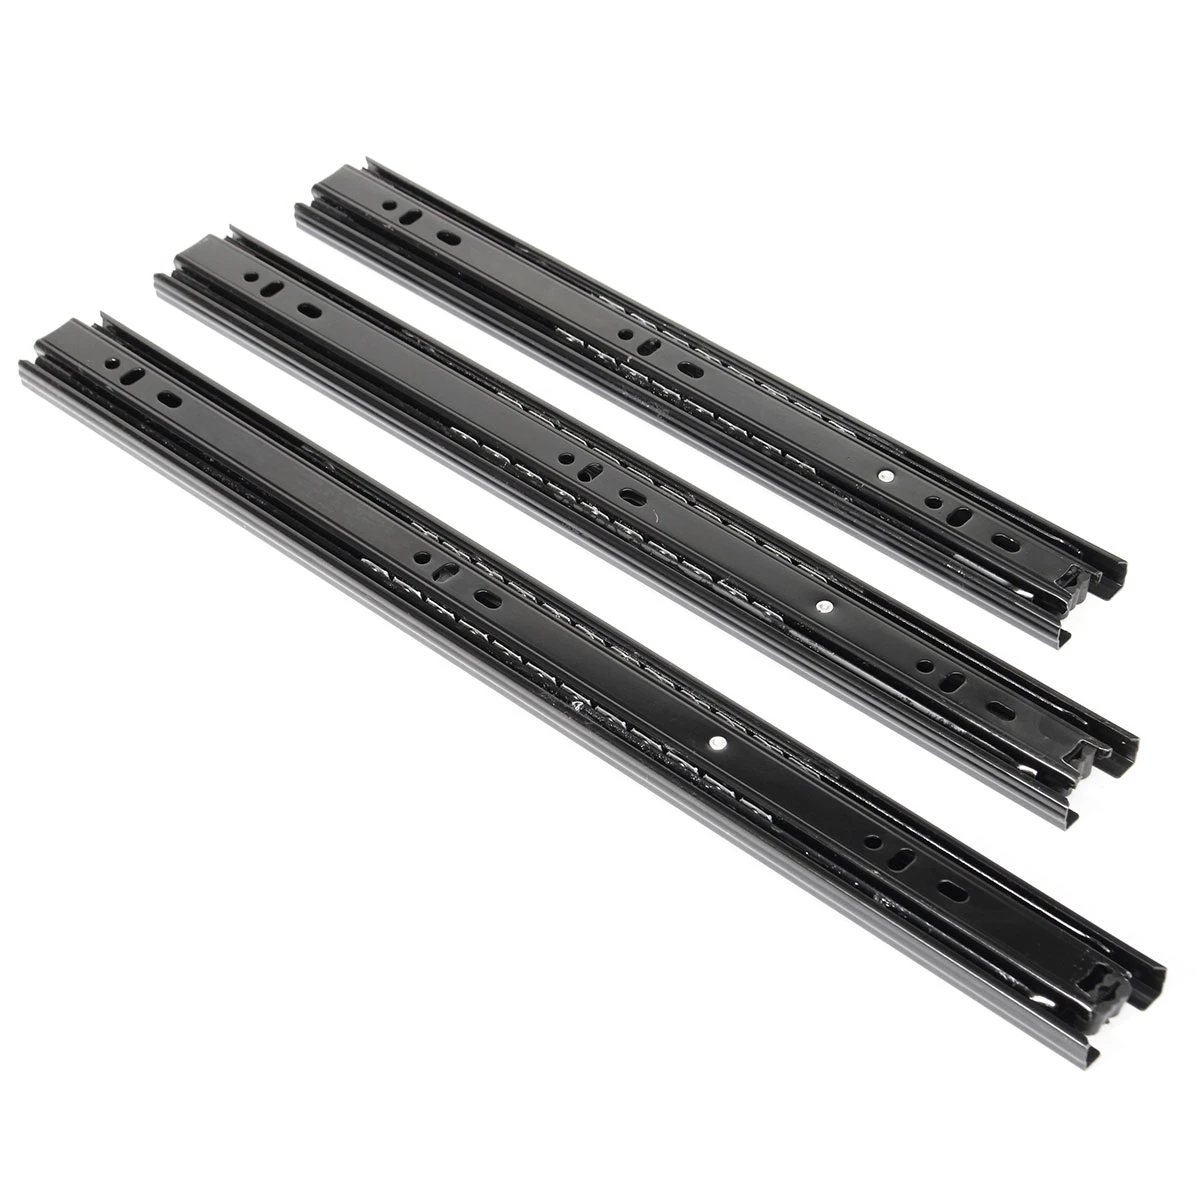 Couleur : 40cm ShuJieEUR Useful 3-Section Sliding Rails for Drawers Full Expansion Damping Buffer Rails with 10 Screws 1 Pair 